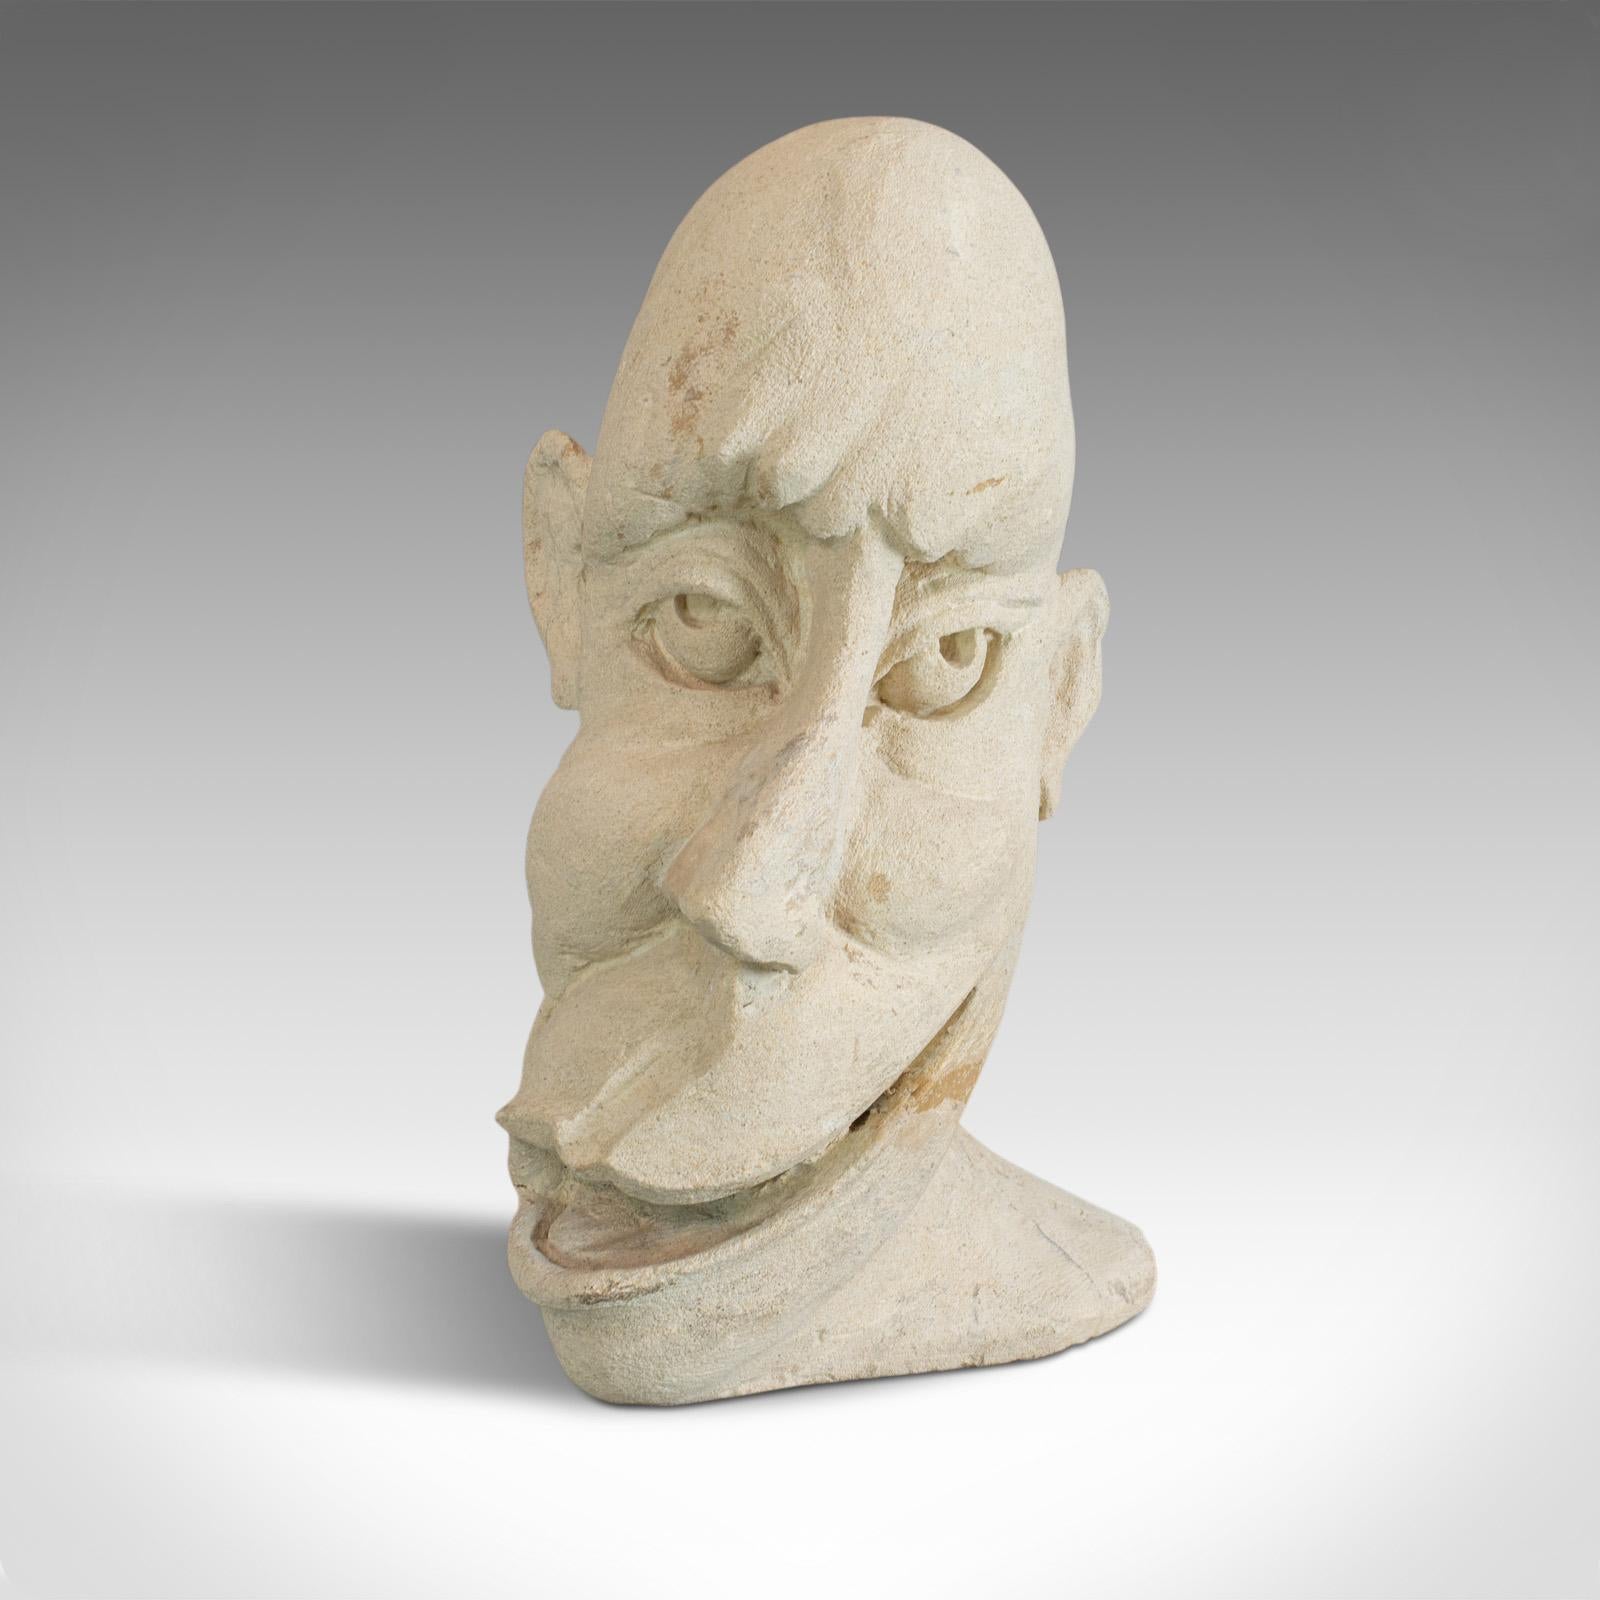 'The Twisted Face' is an individual bust by renowned sculptural artist Dominic Hurley. An English, bath stone sculpture dating to the 20th century.

Hand carved from a single form of famous bath stone
Jovial facial detail adds to the